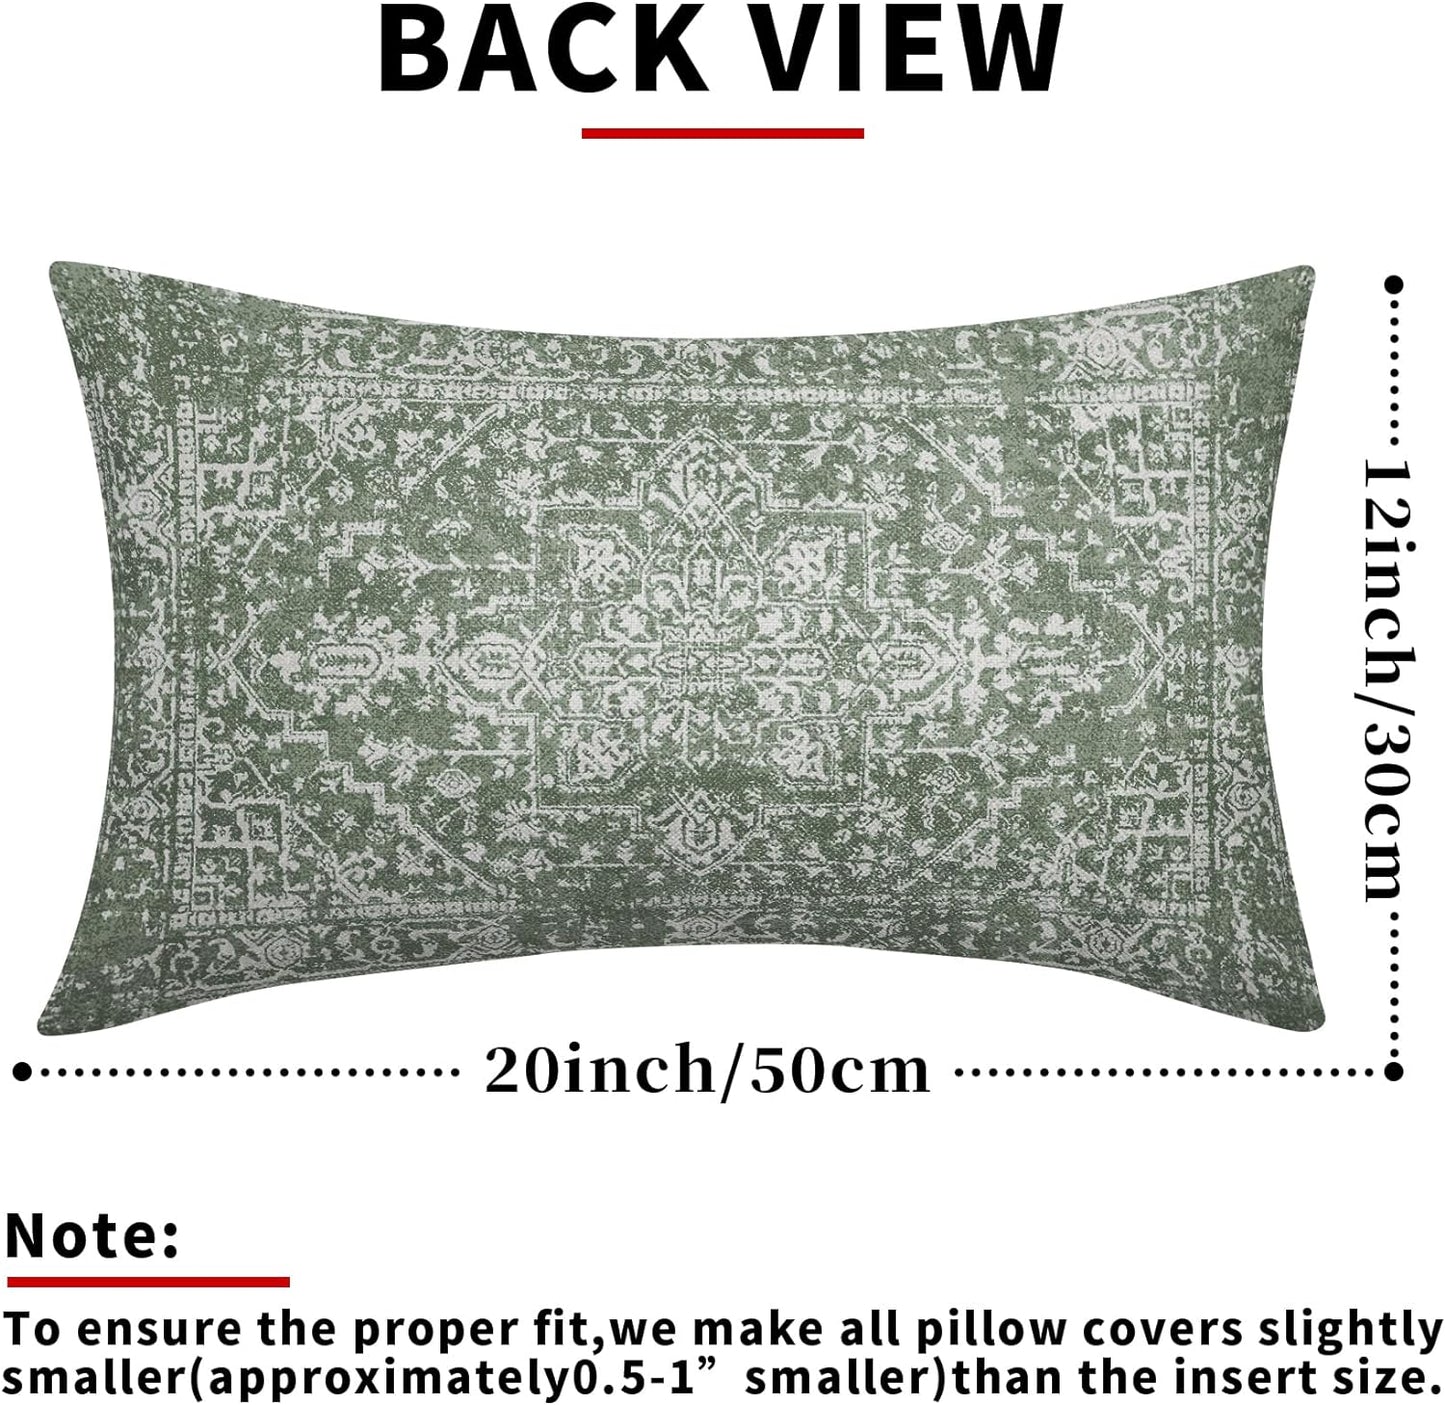 Smozenith Sage Green Boho Lumbar Pillow Covers 12x20 Inch Bohemian Carpet Ethnic Decorative Rectangle Pillow Cases Beige Tan Gray Floral Cushion Covers Farmhouse Home Decor For Sofa Couch Outdoor Set of 2